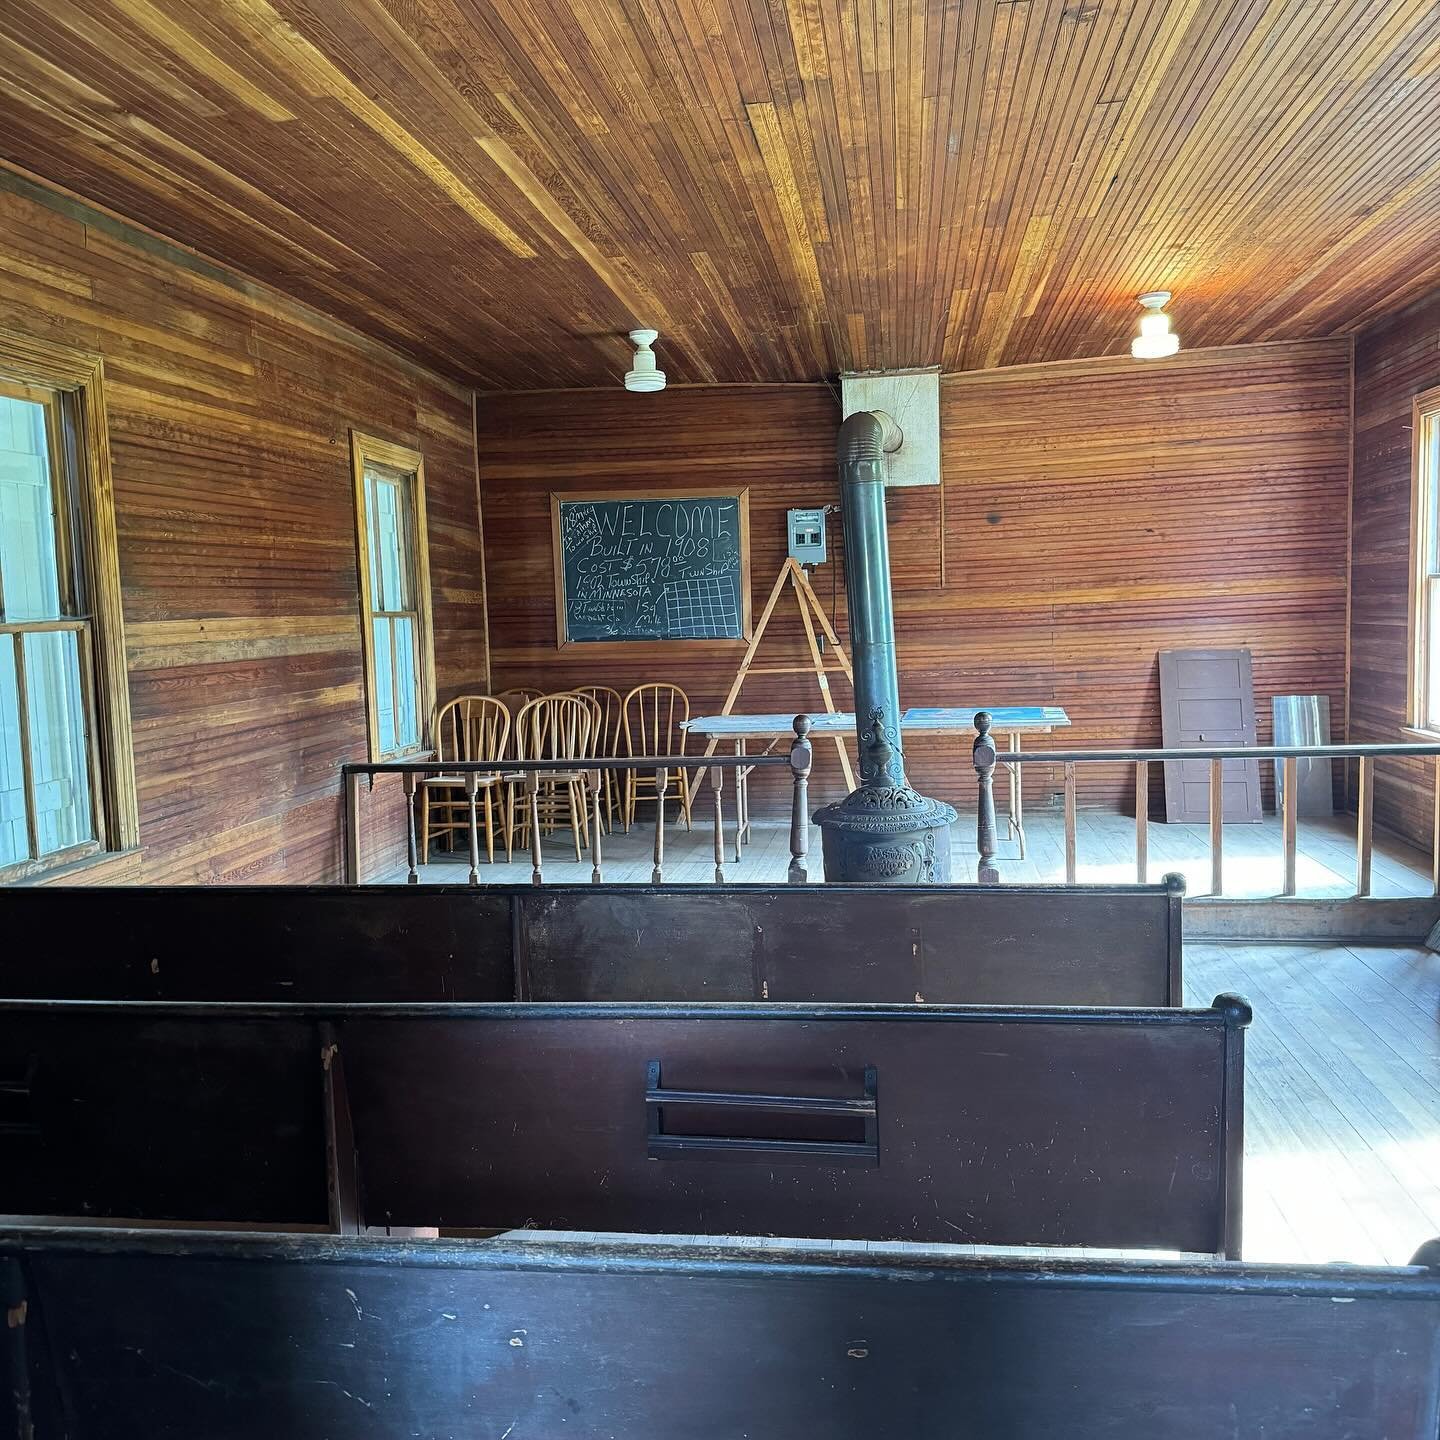 Getting some of that spring cleaning going on with the buildings on our grounds. The Town Hall and Cabin got a little TLC this morning. Thanks to some very helpful volunteers!

Our two structures will now be open to the public starting tomorrow.

#wr